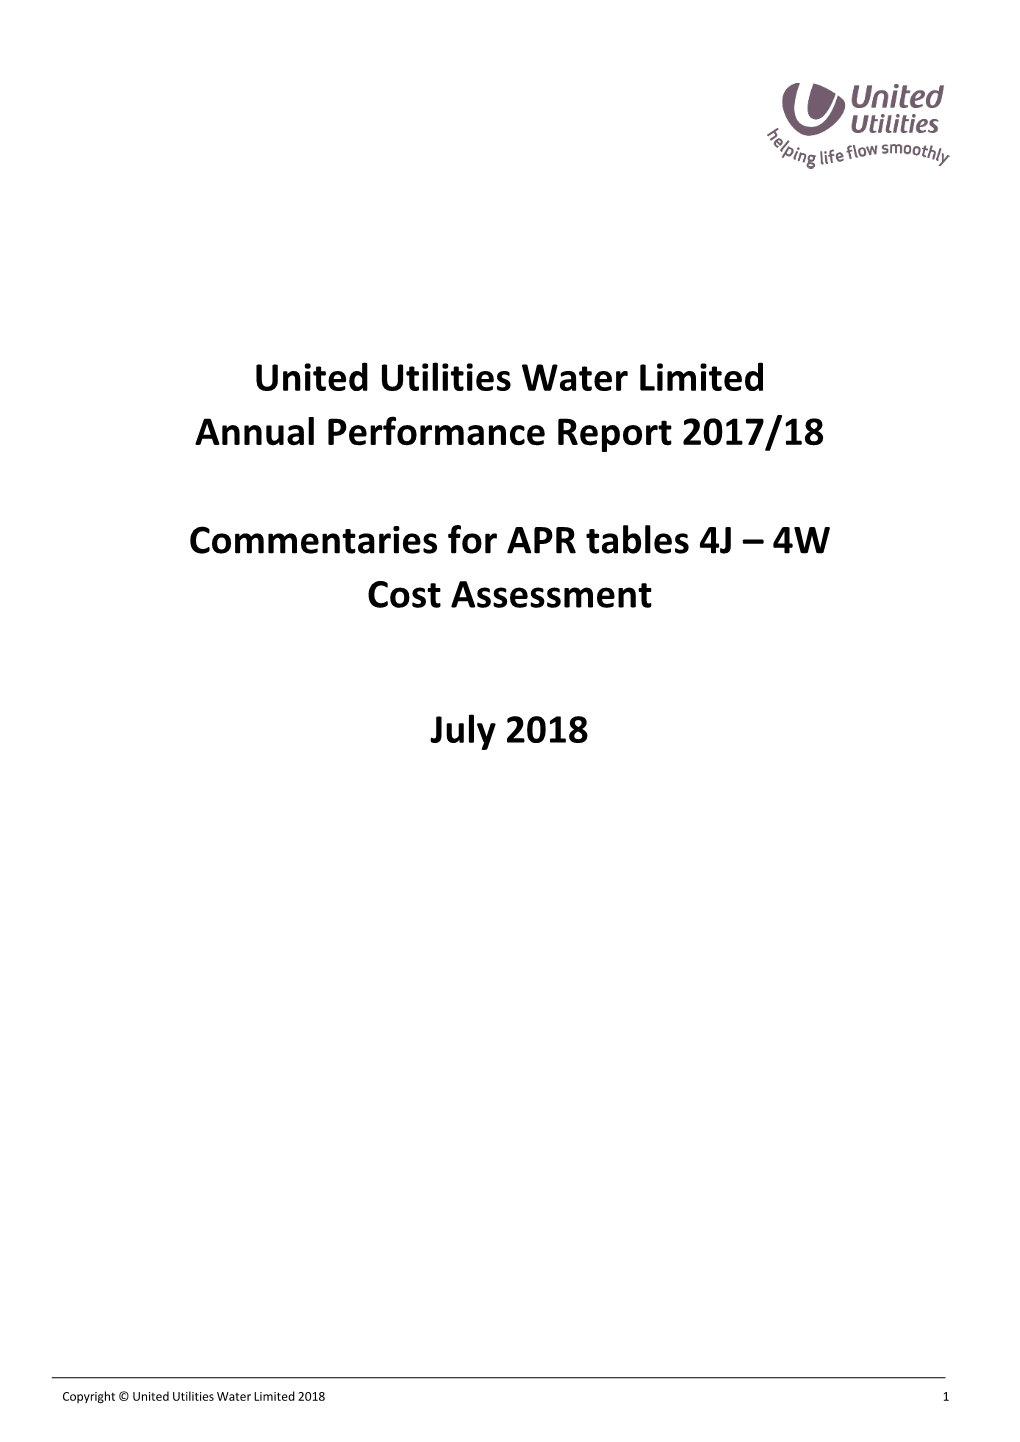 UUW 2018 Cost Assessment Table Commentary